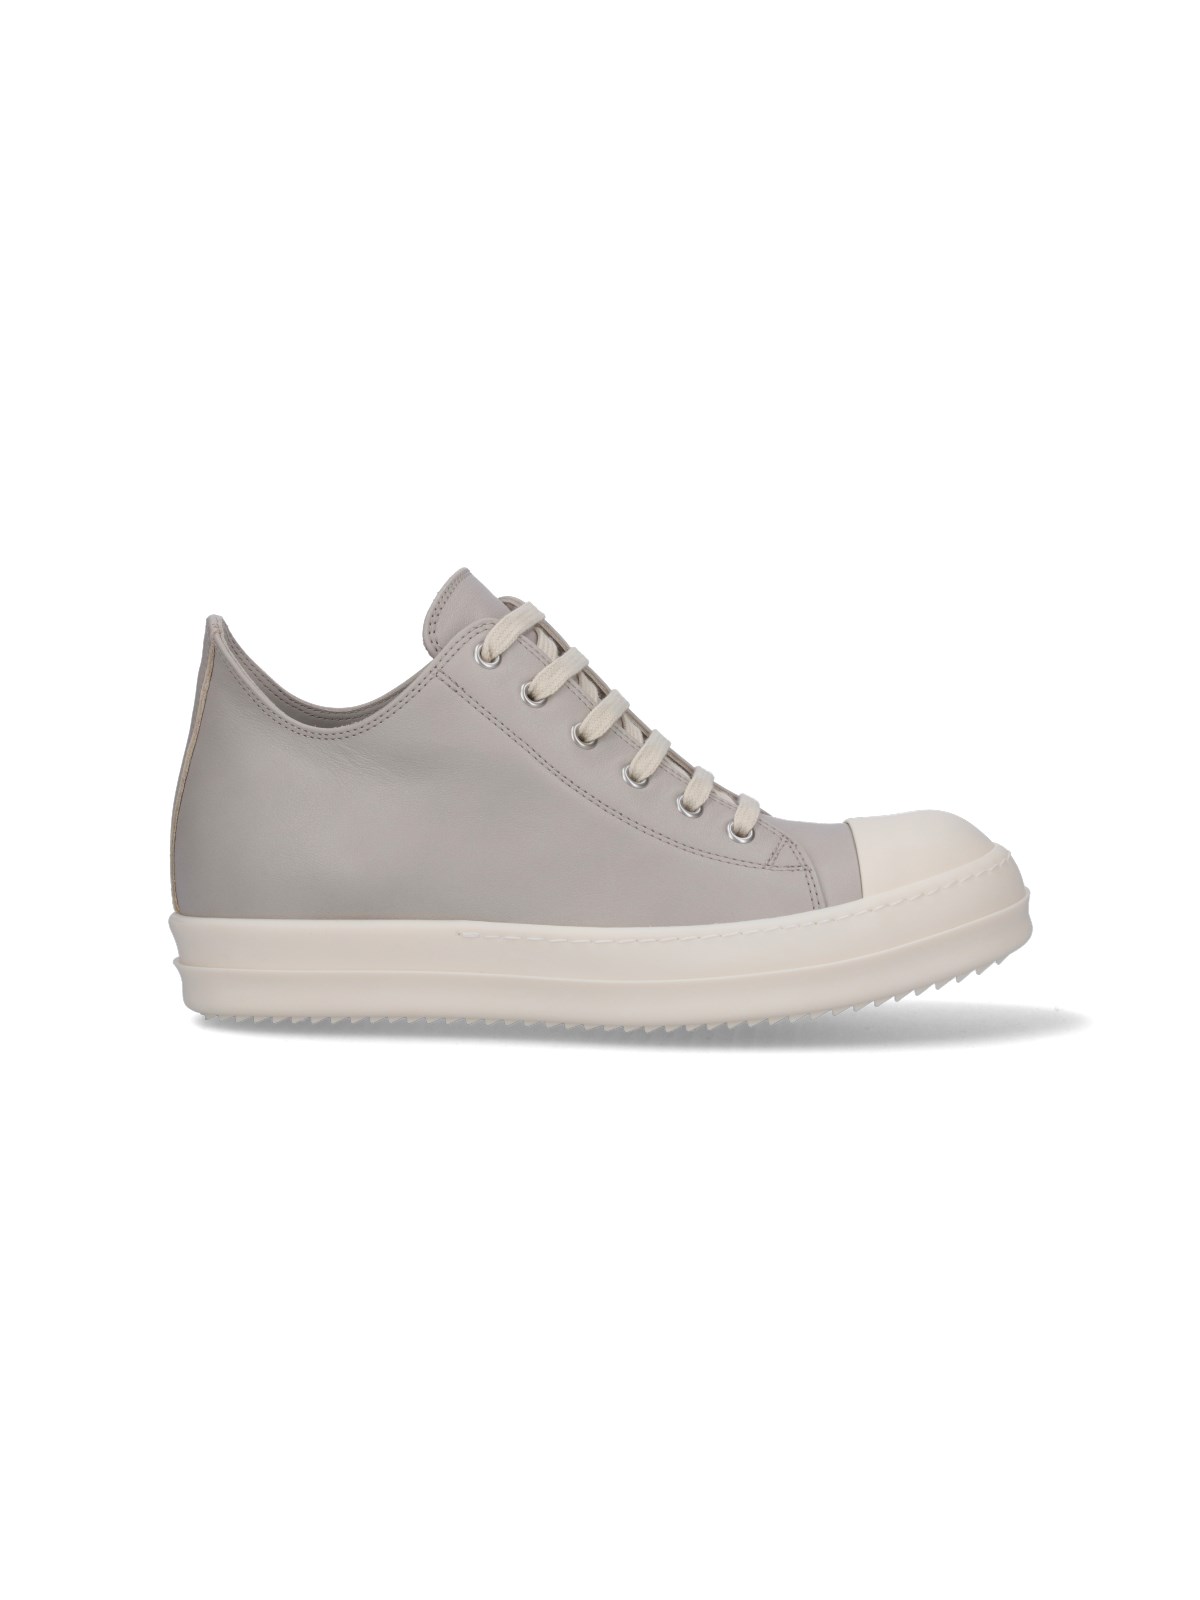 Rick Owens "lido Low" Trainers In Grey